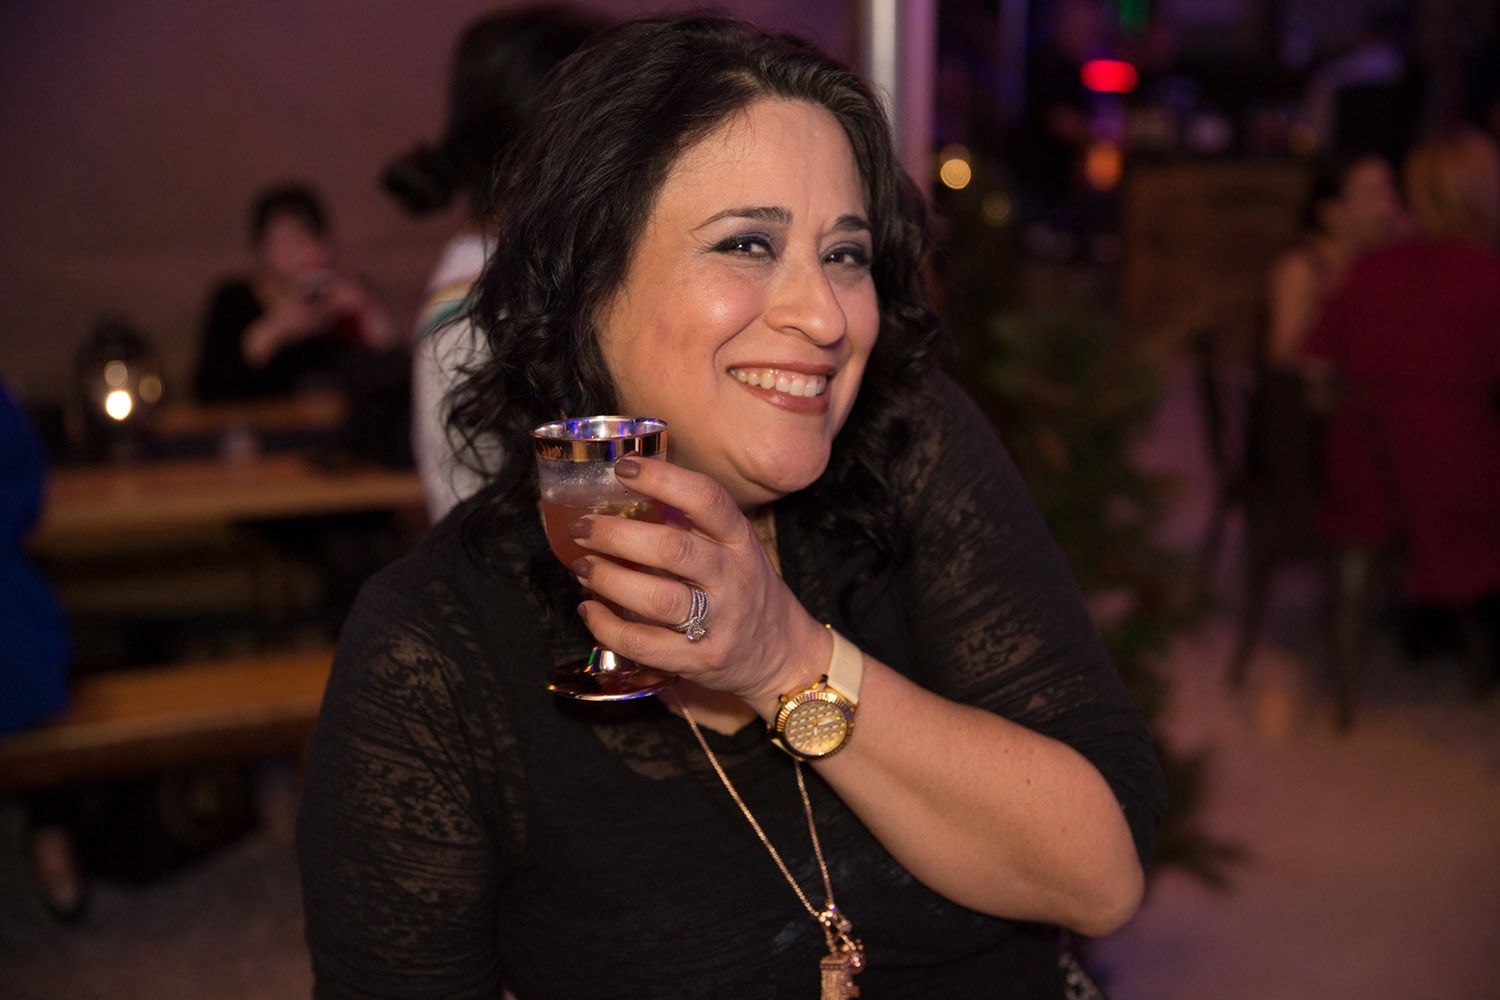 Cocktail enthusiasts attend Cocktails in the Enchanted Forest during the 2019 San Antonio Cocktail Festival Saturday night at Villita Assembly Hall.